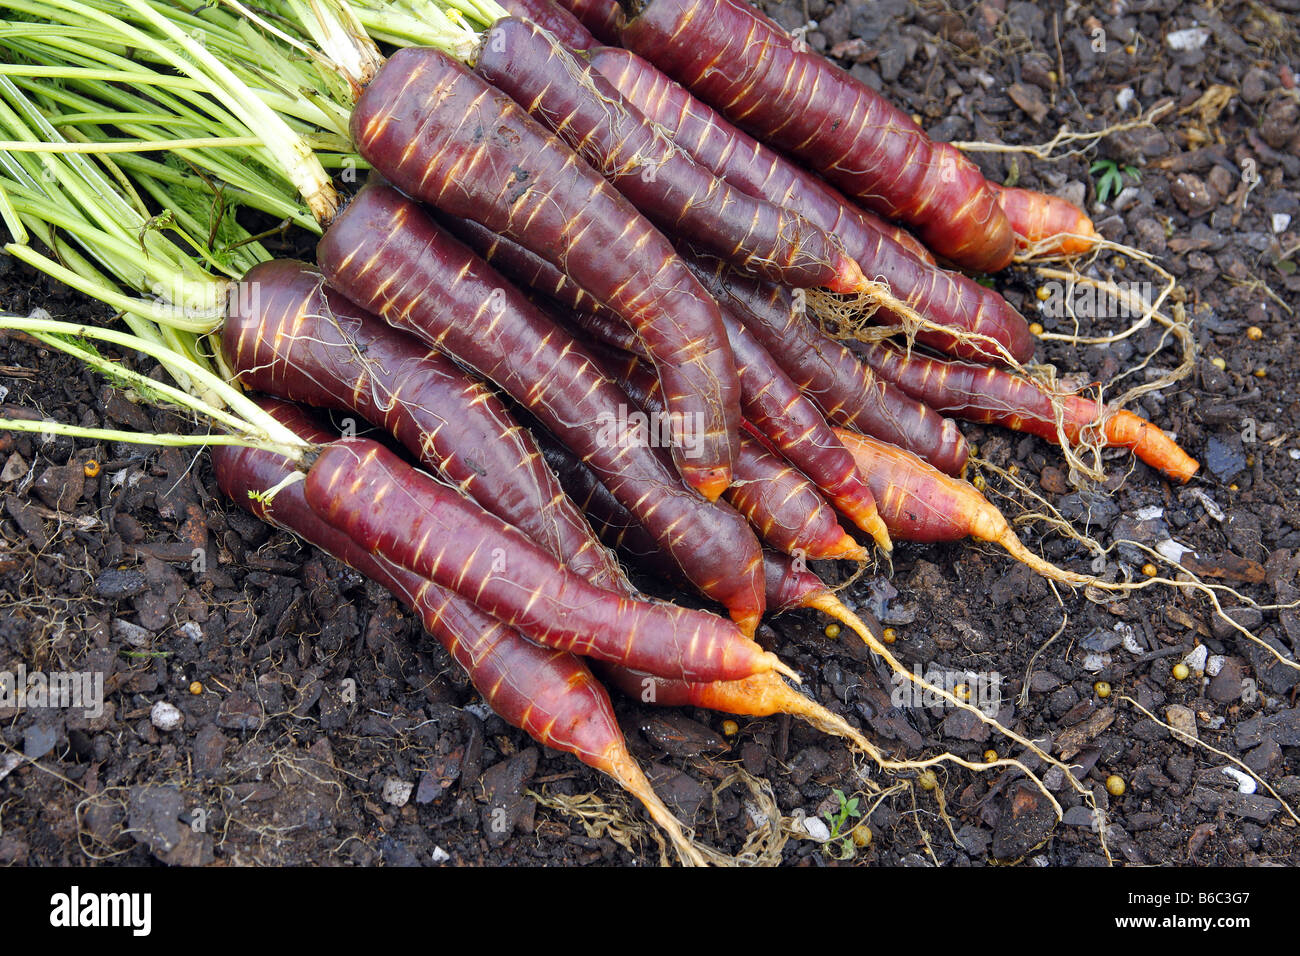 CARROT PURPLE HAZE THE YIELD FROM A SINGLE 15 LITRE POT THE COLOUR BECOMES MORE INTENSE AS THEY MATURE Stock Photo